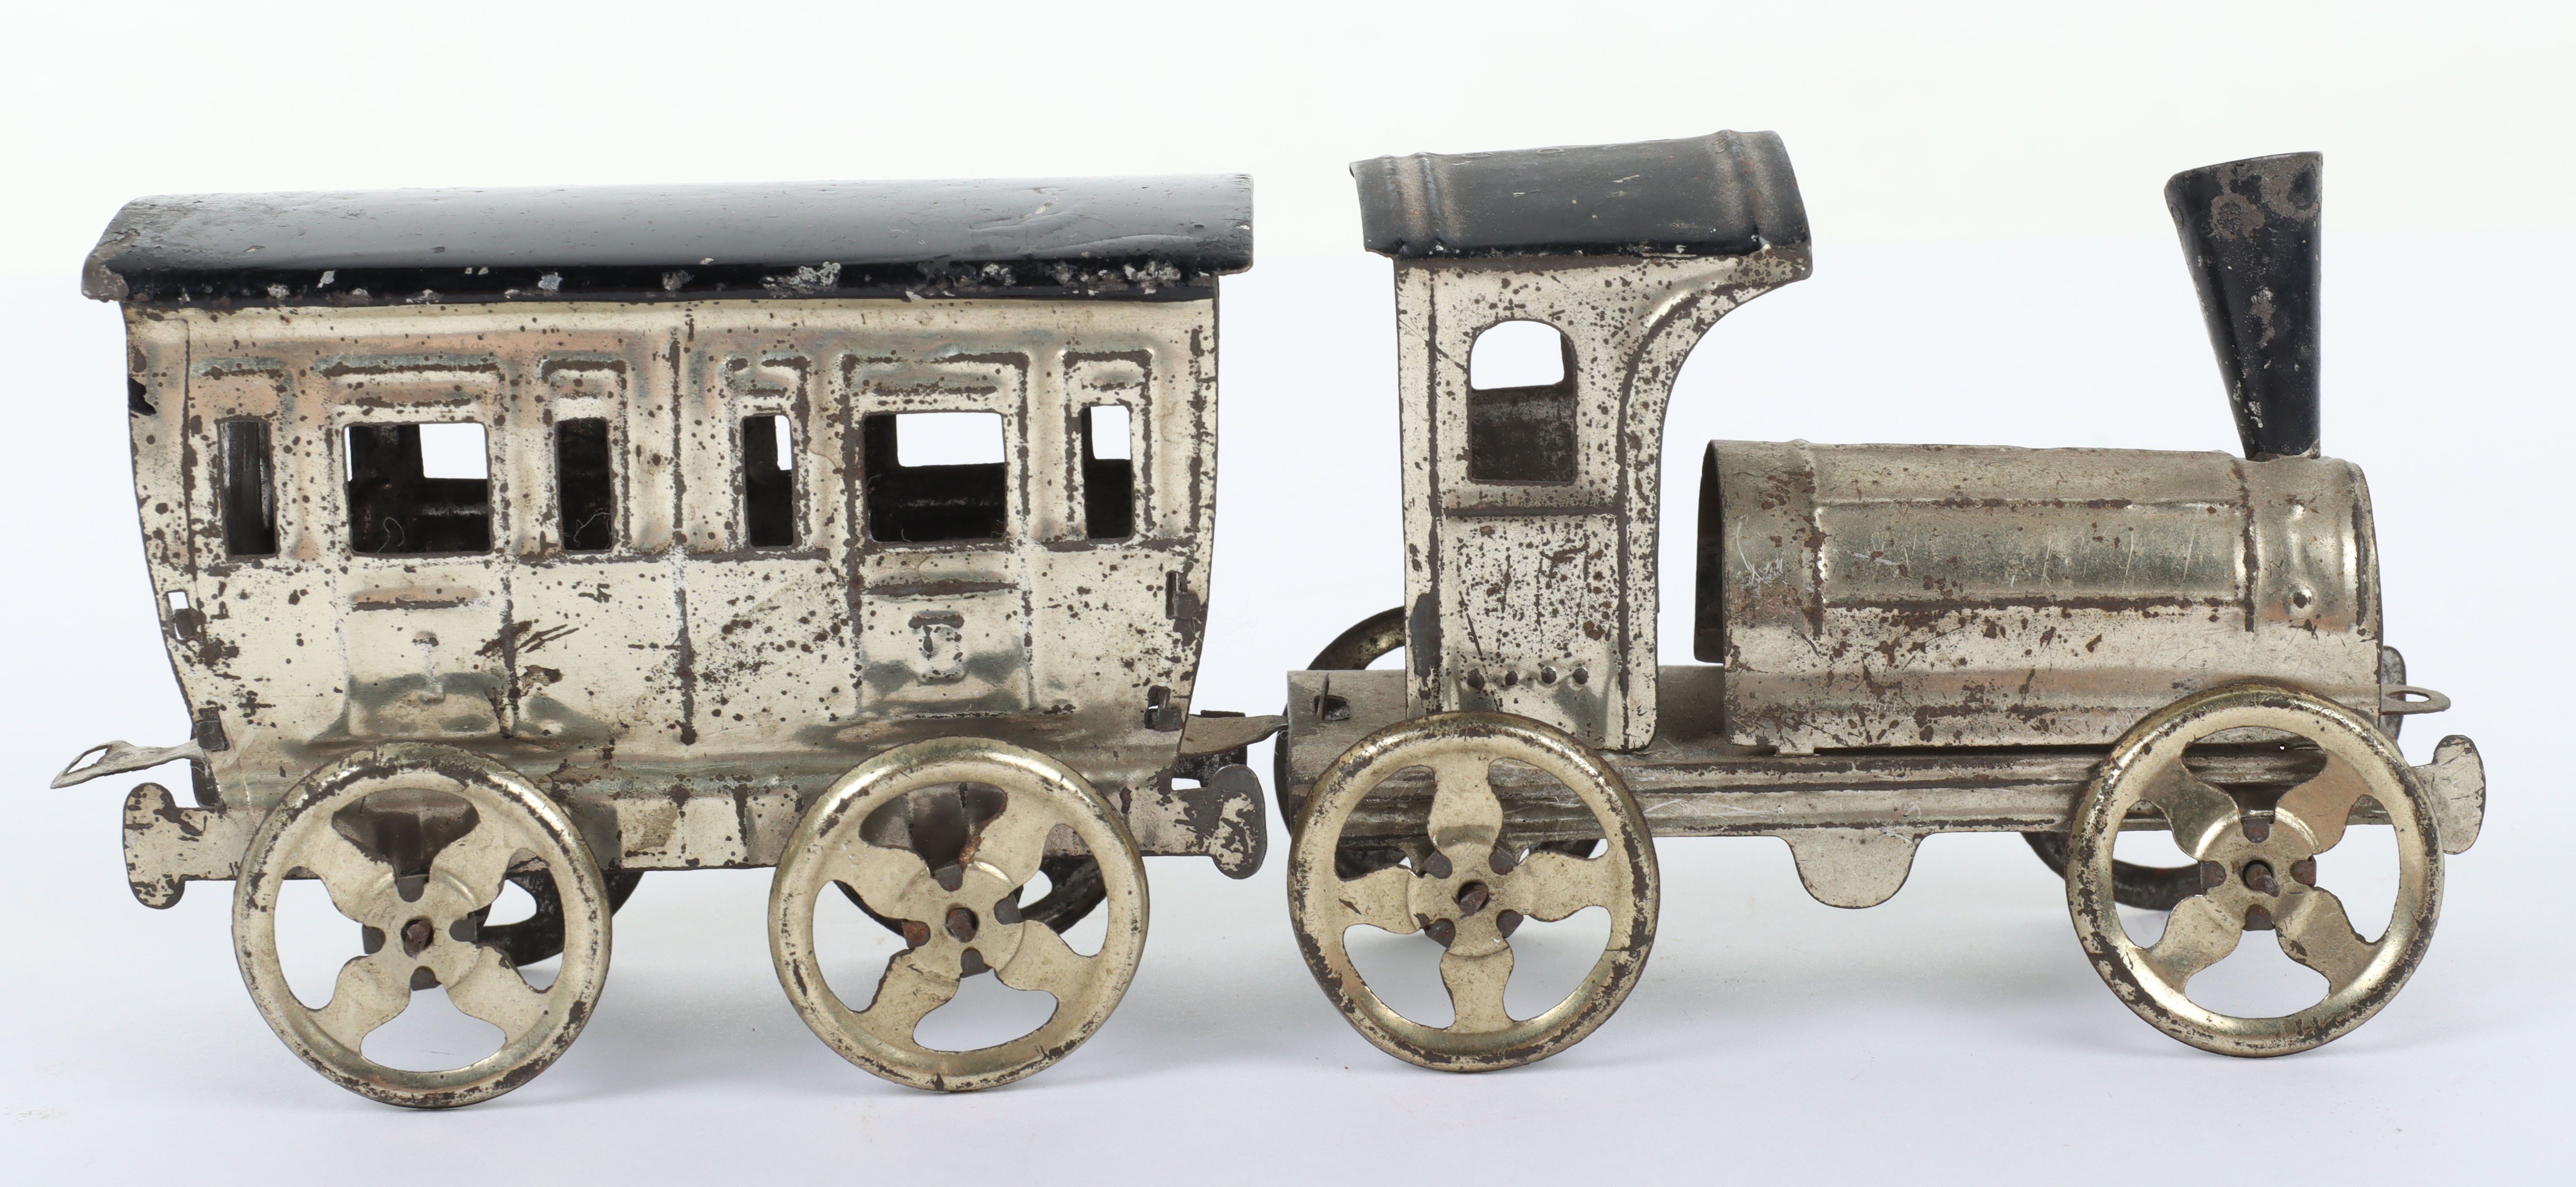 Early Meier pressed tinplate locomotive and carriage penny toy, German circa 1900 - Image 3 of 6